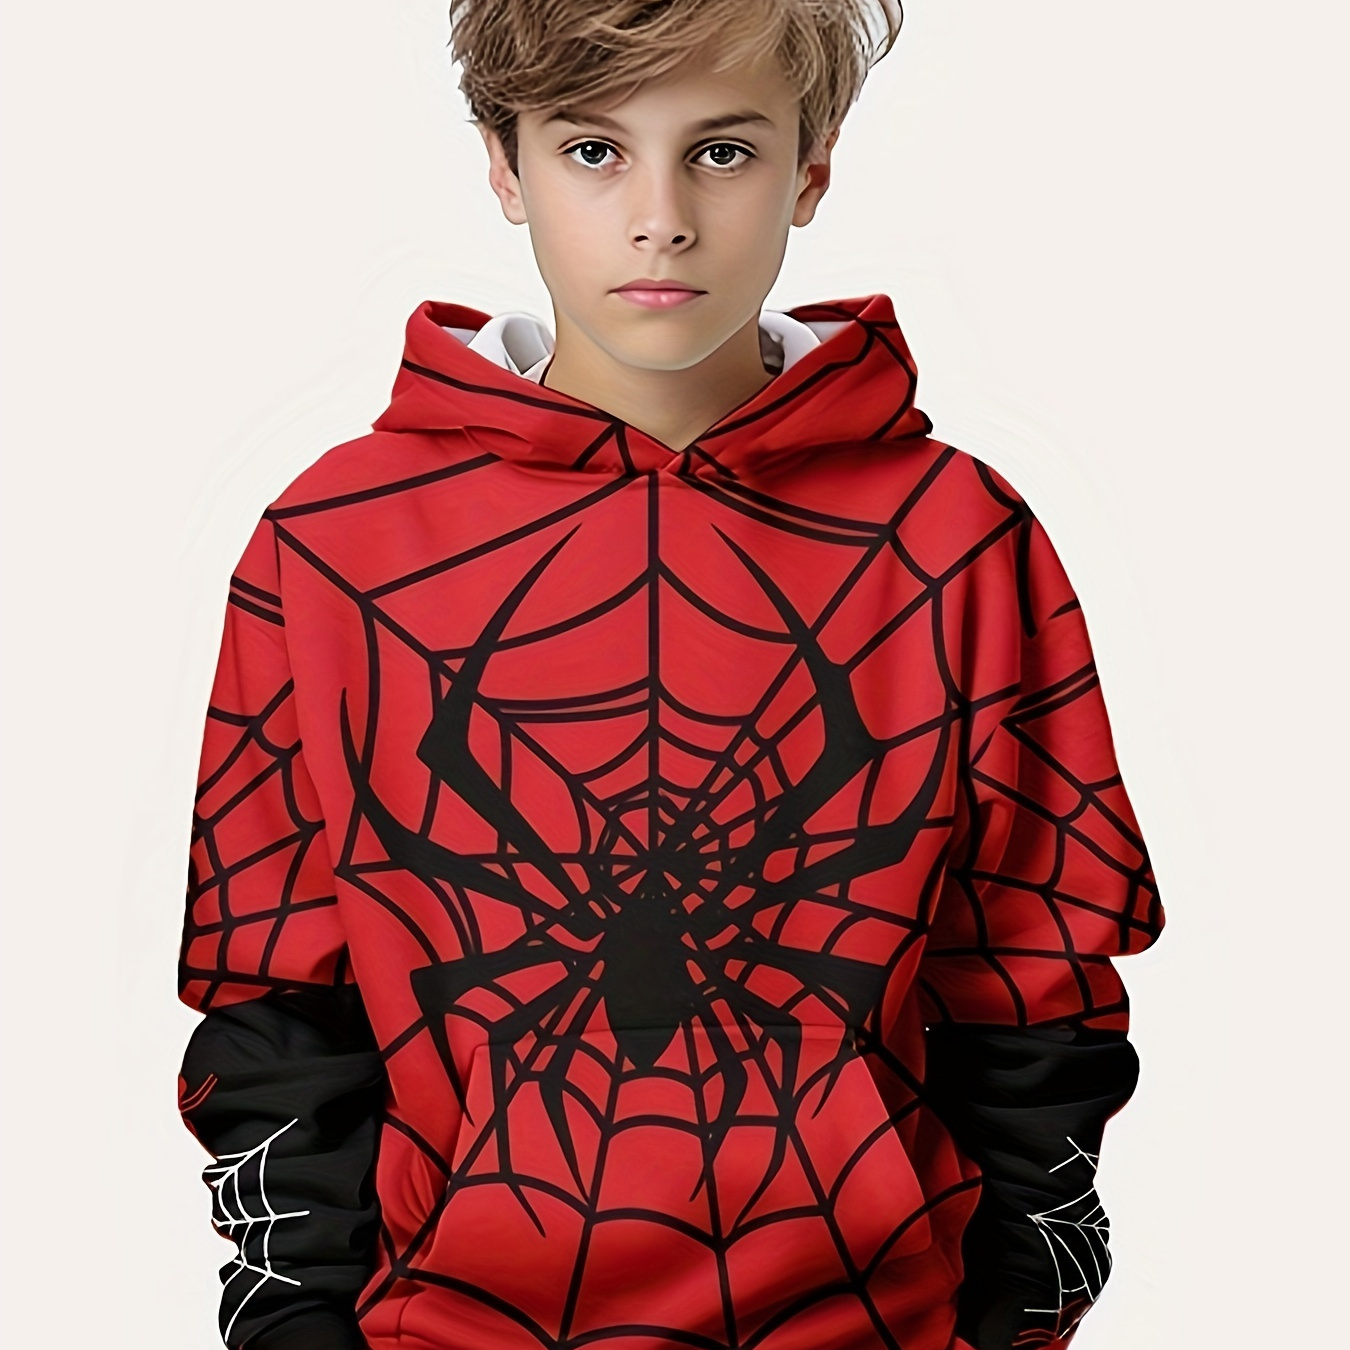 

Cool Spider And Web 3d Print Boys Long Sleeve Hoodie, Stay Stylish And Cozy Sweatshirt - Perfect Spring Fall Winter Essential For Your Little Fashionista!